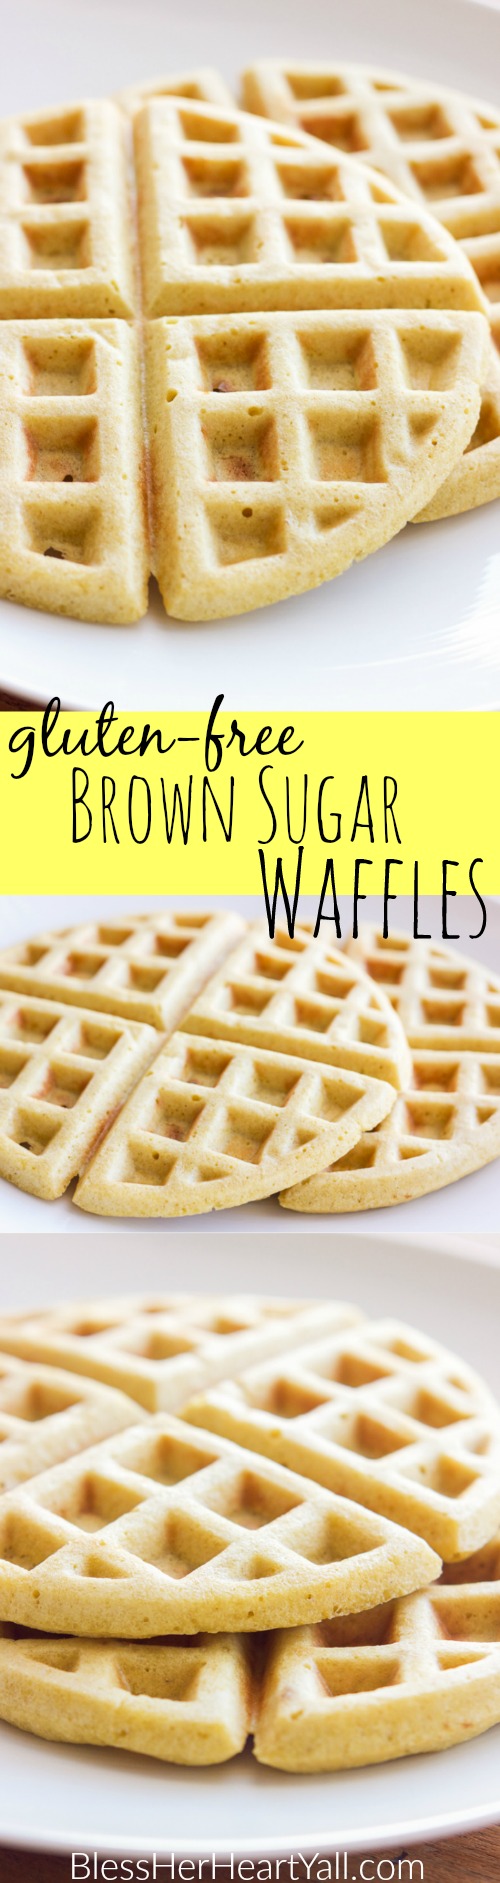 Yum! These gluten-free brown sugar waffles are fluffy, soft, with a hint of brown sugar. A gluten-free 5-minute breakfast never tasted so good!